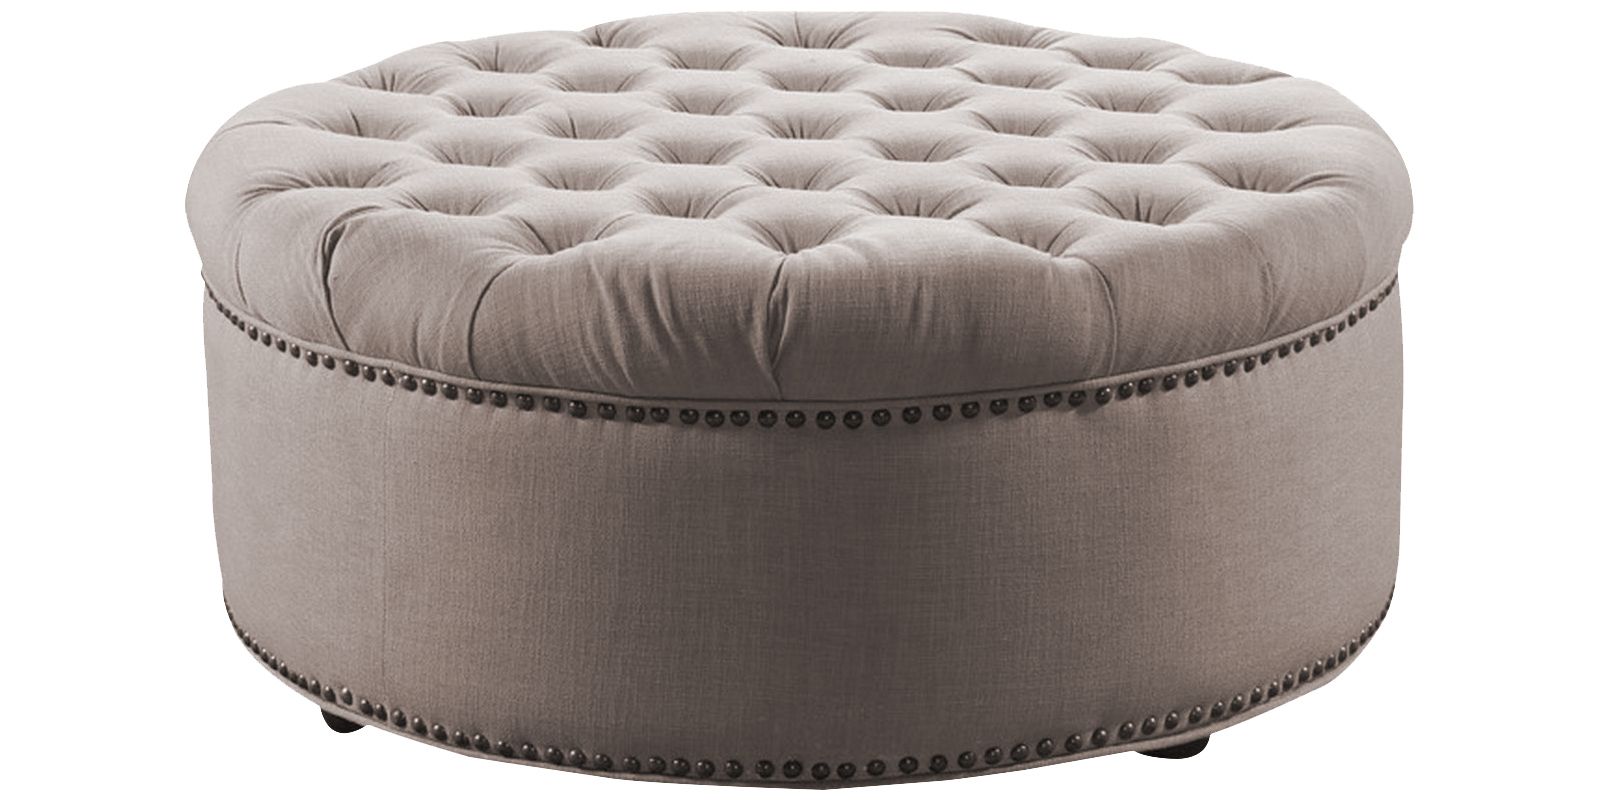 Stylish Tufted Round Ottoman In Beige Colour | Dreamzz Furniture Within Cream Fabric Tufted Round Storage Ottomans (View 14 of 20)